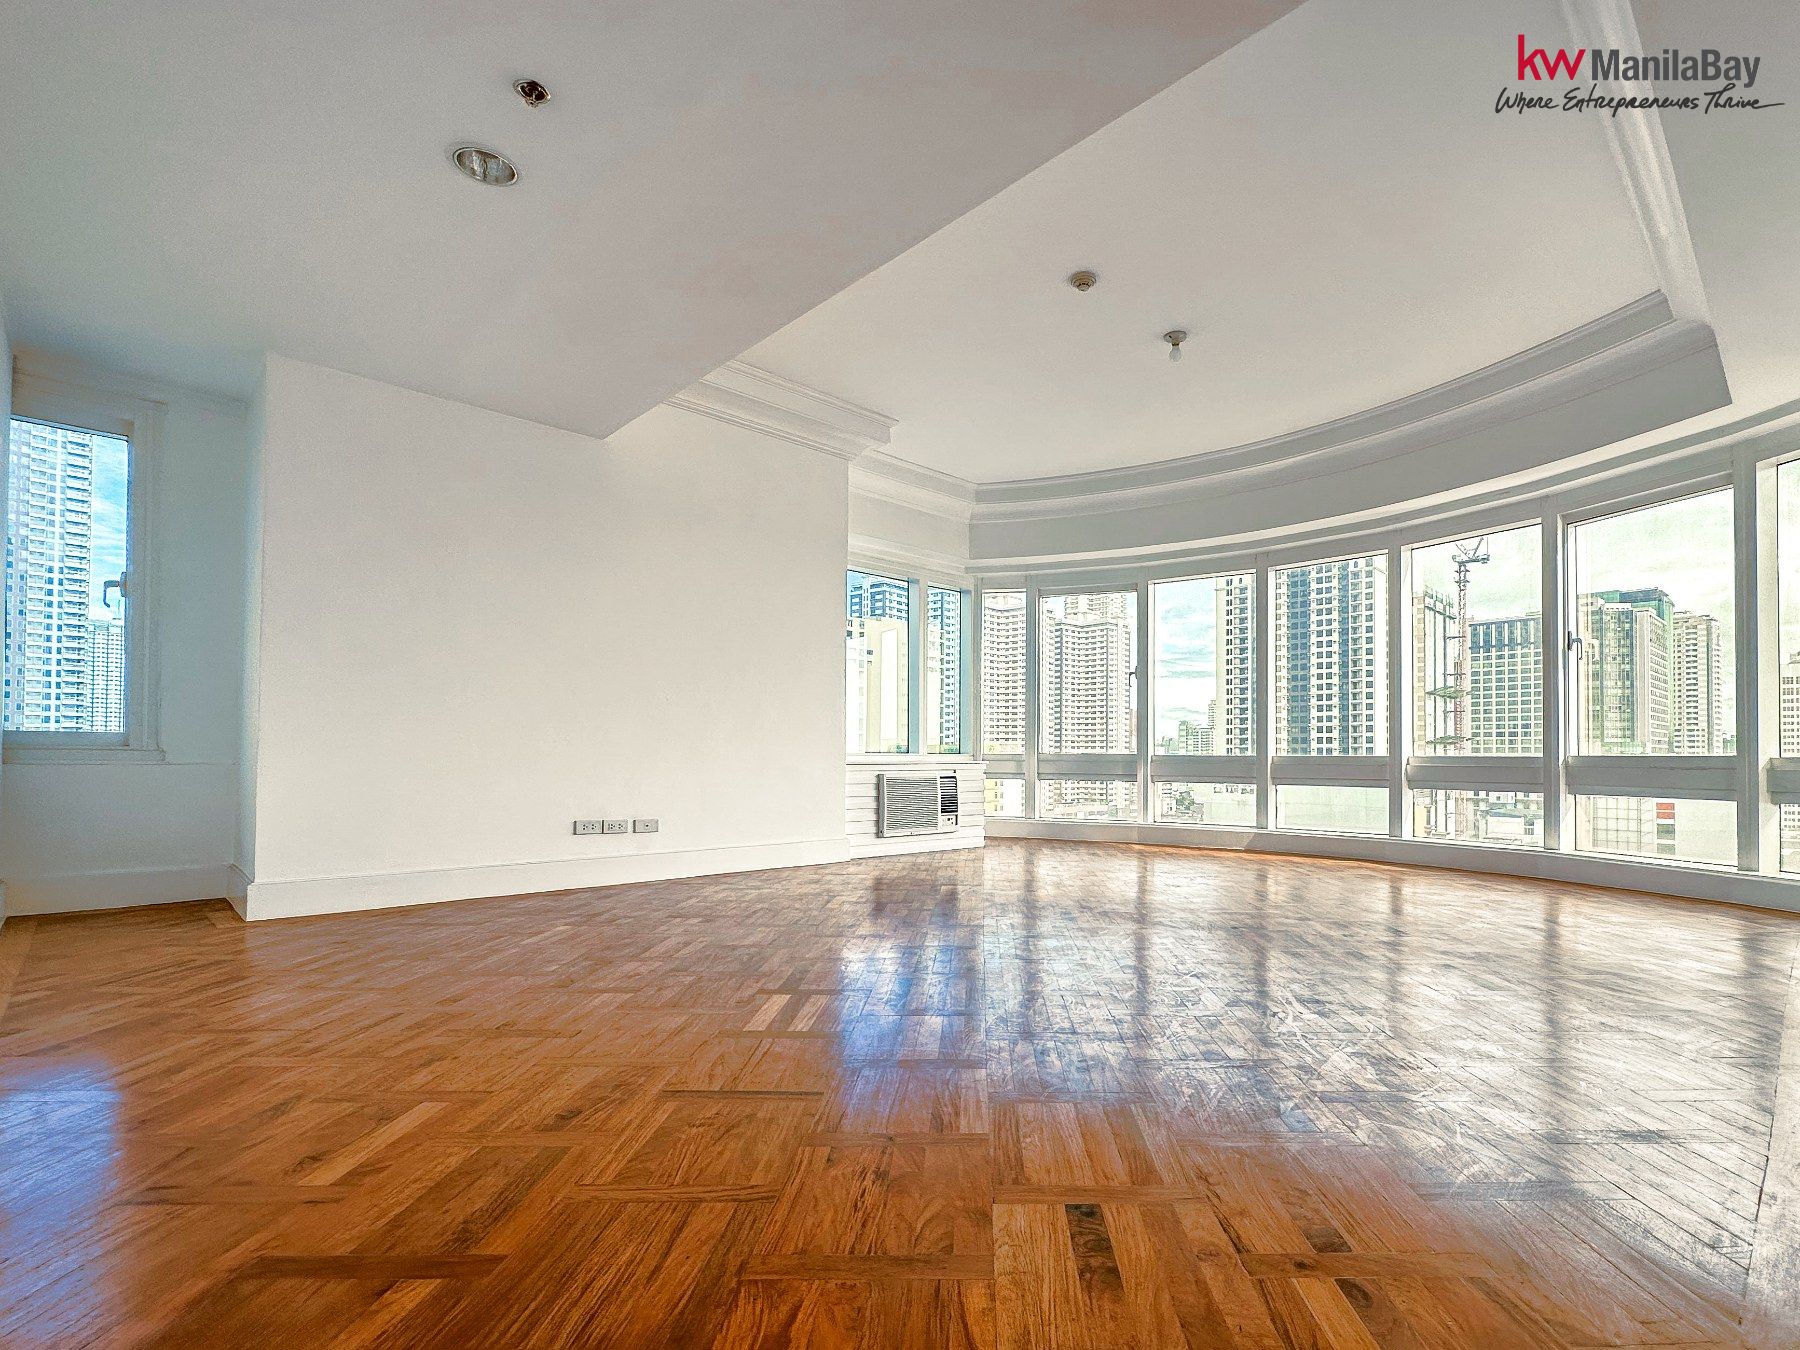 FOR LEASE: 4-Bedroom Unit in Golden Empire Tower